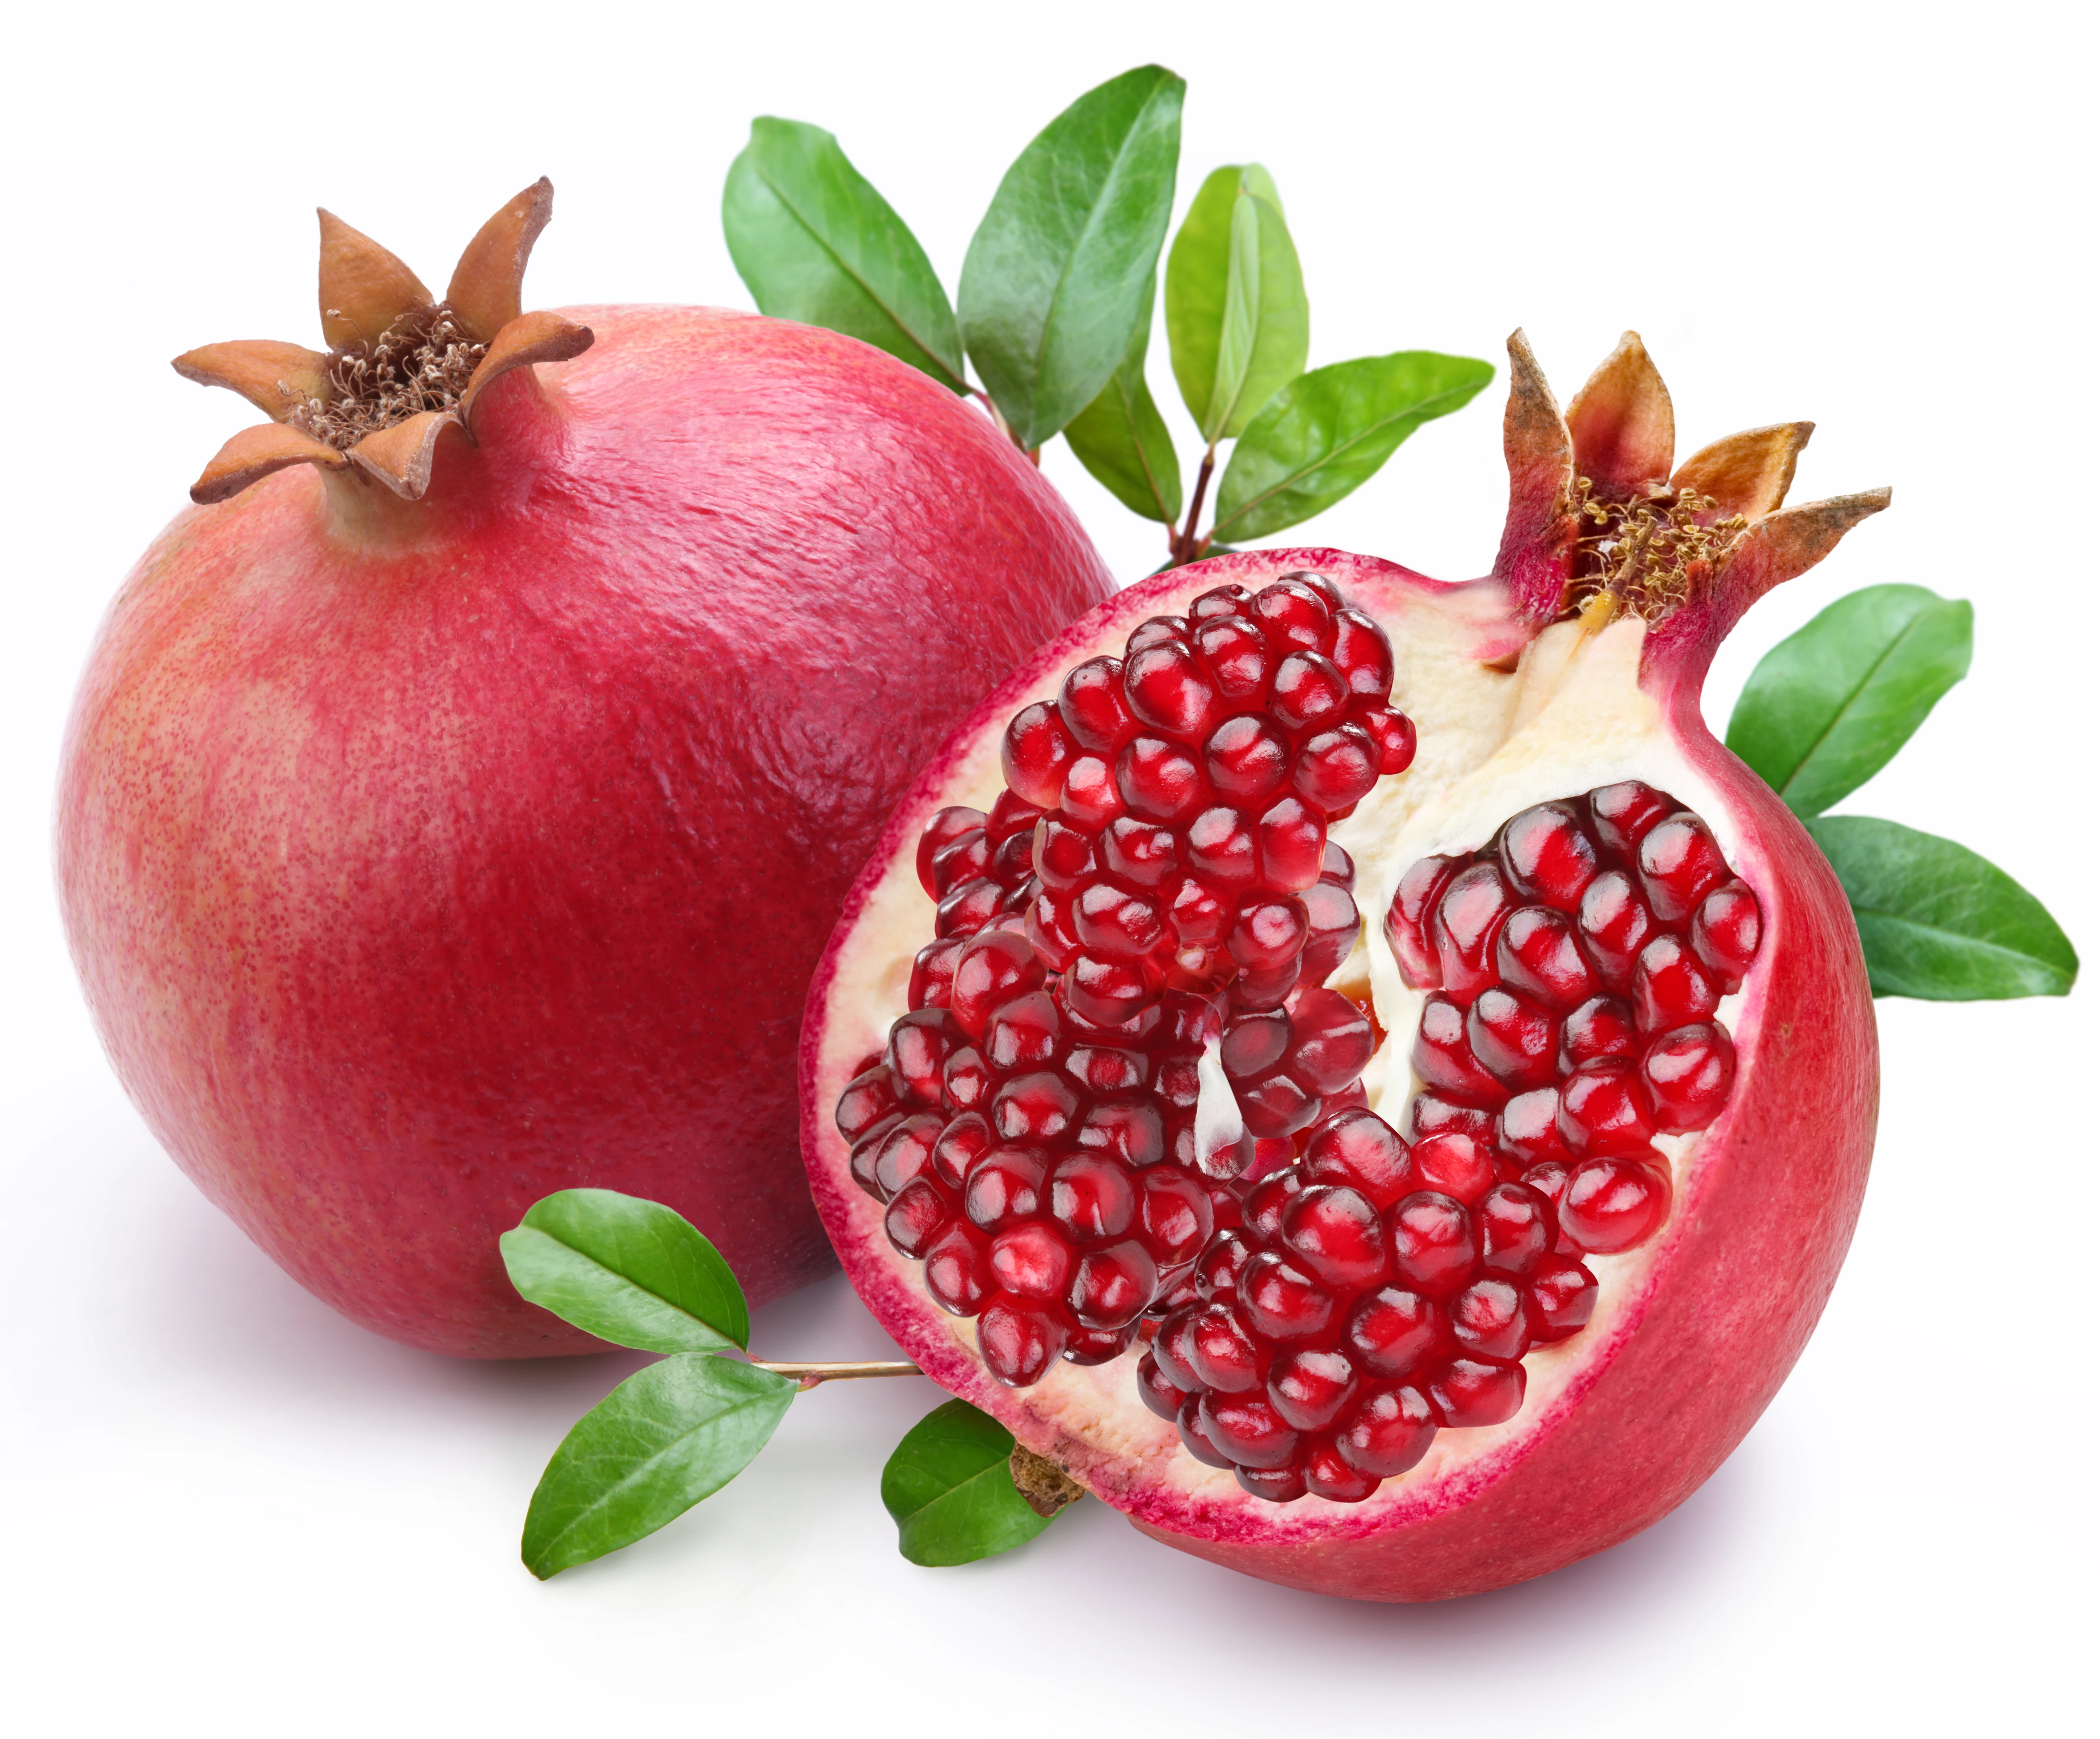 juicy pomegranate and its half with leaves